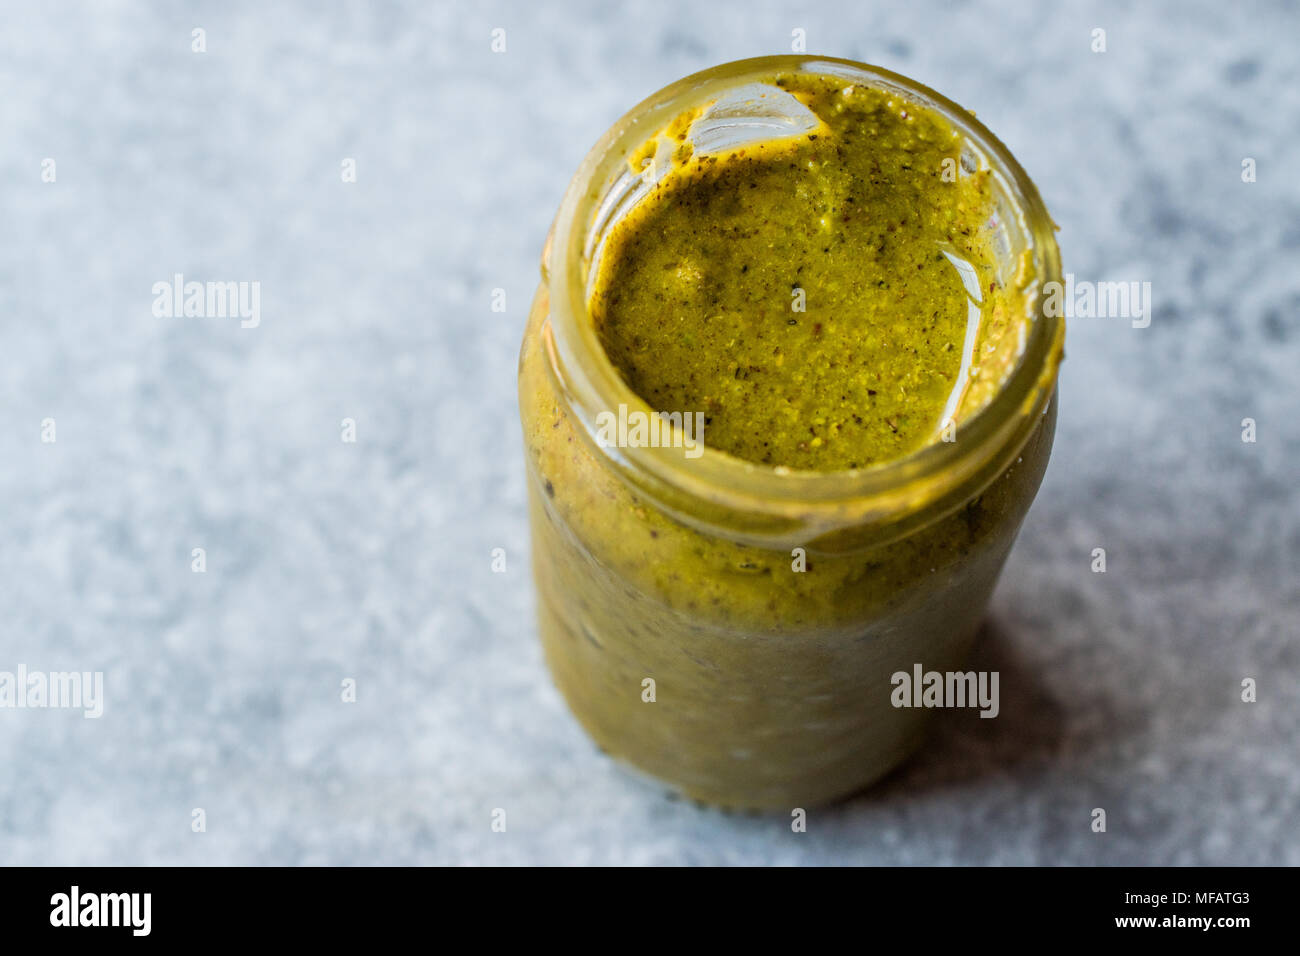 Green Pistachio Paste Urbech made with  Peanut Butter. Organic Food. Stock Photo